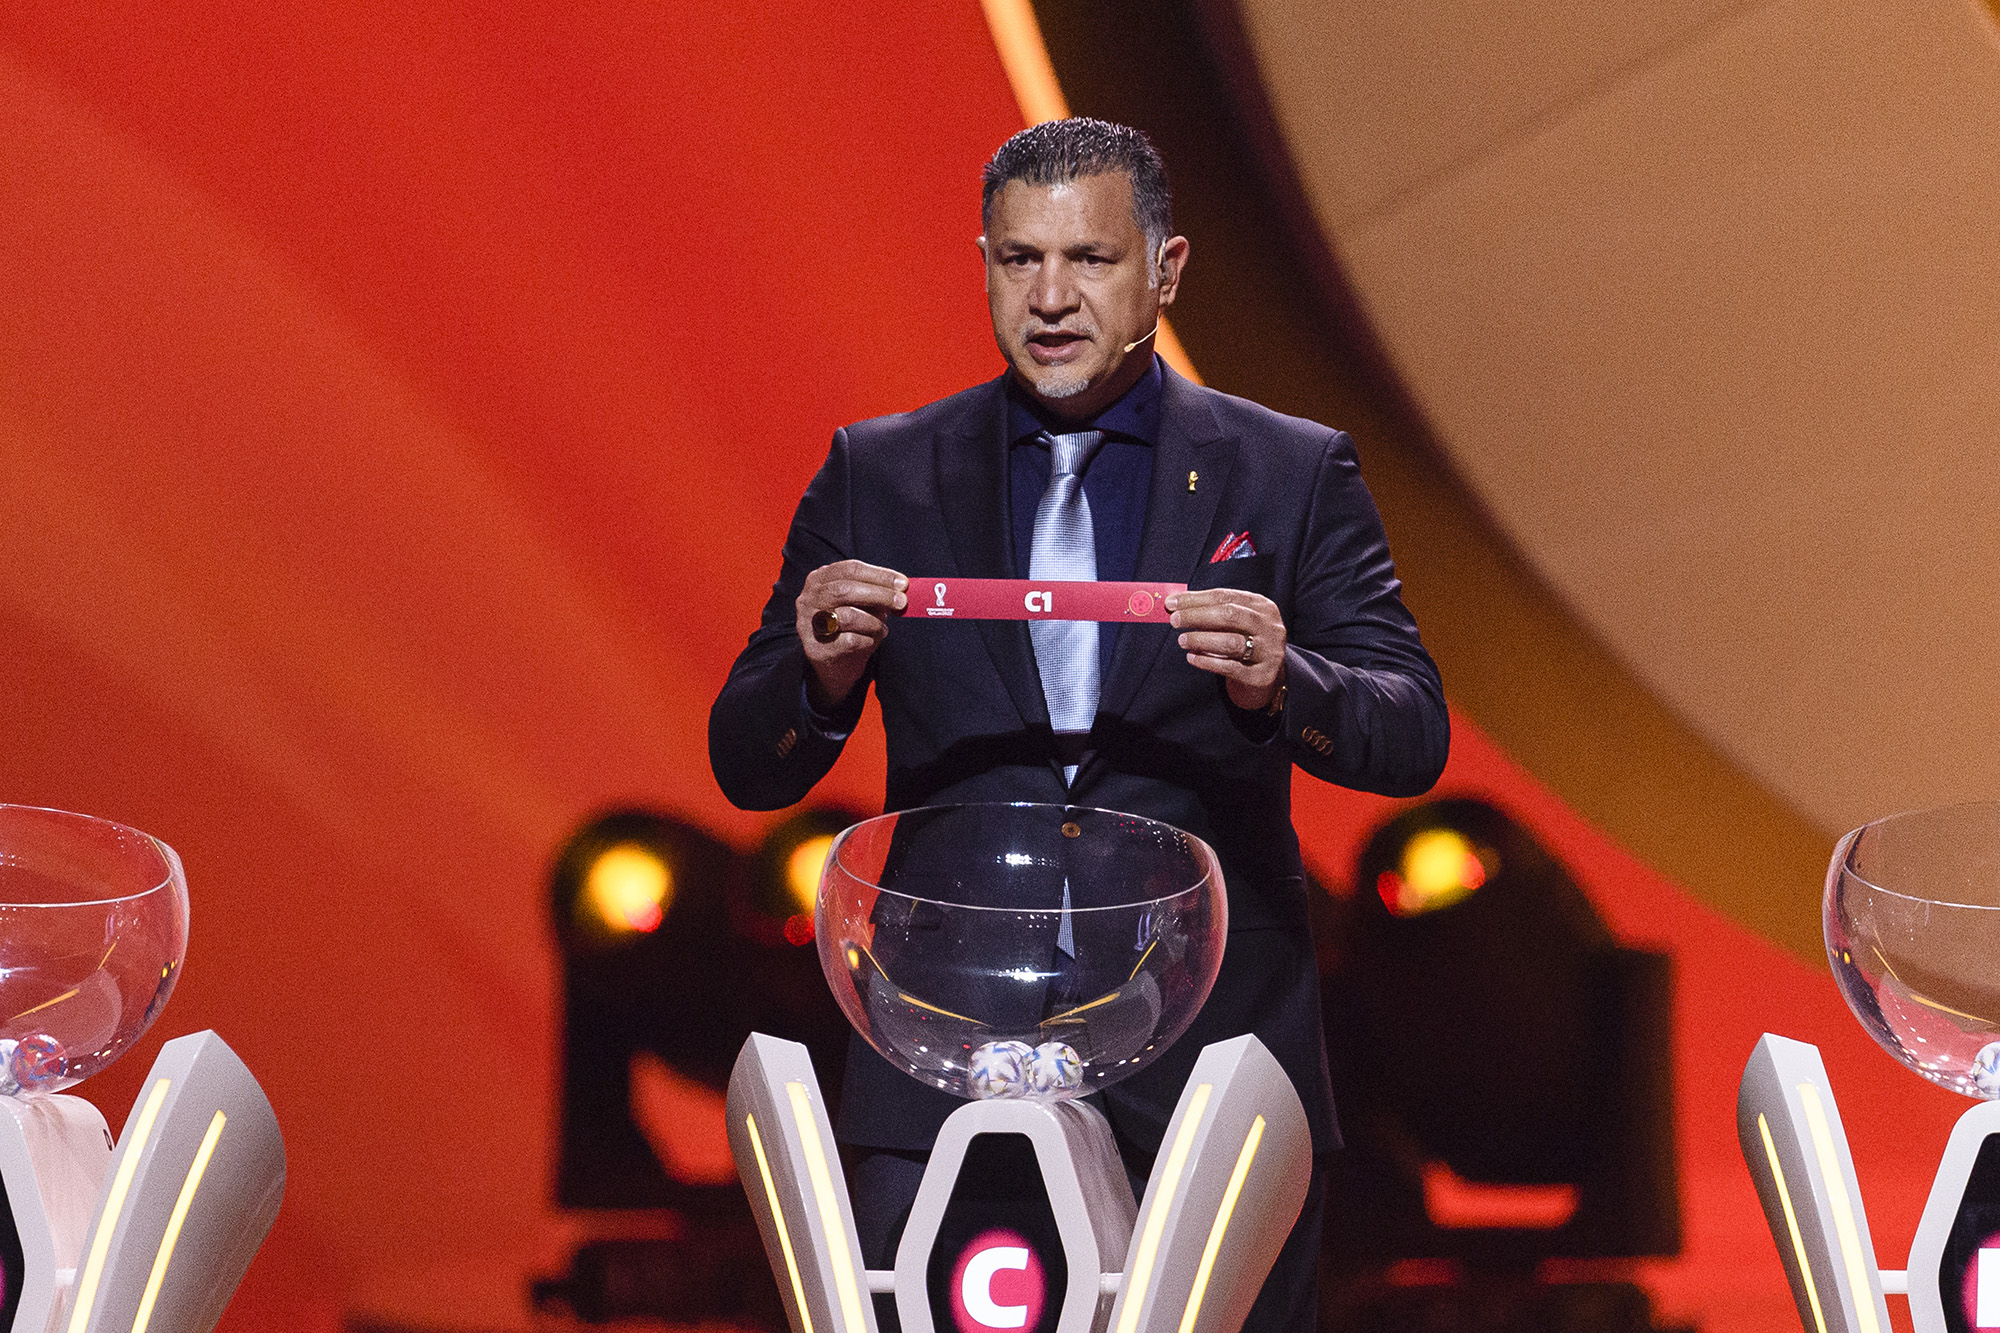 Ali Daei of Iran during the FIFA World Cup Qatar 2022 Final Draw at Doha Exhibition Center on April 1, 2022 in Doha, Qatar. 